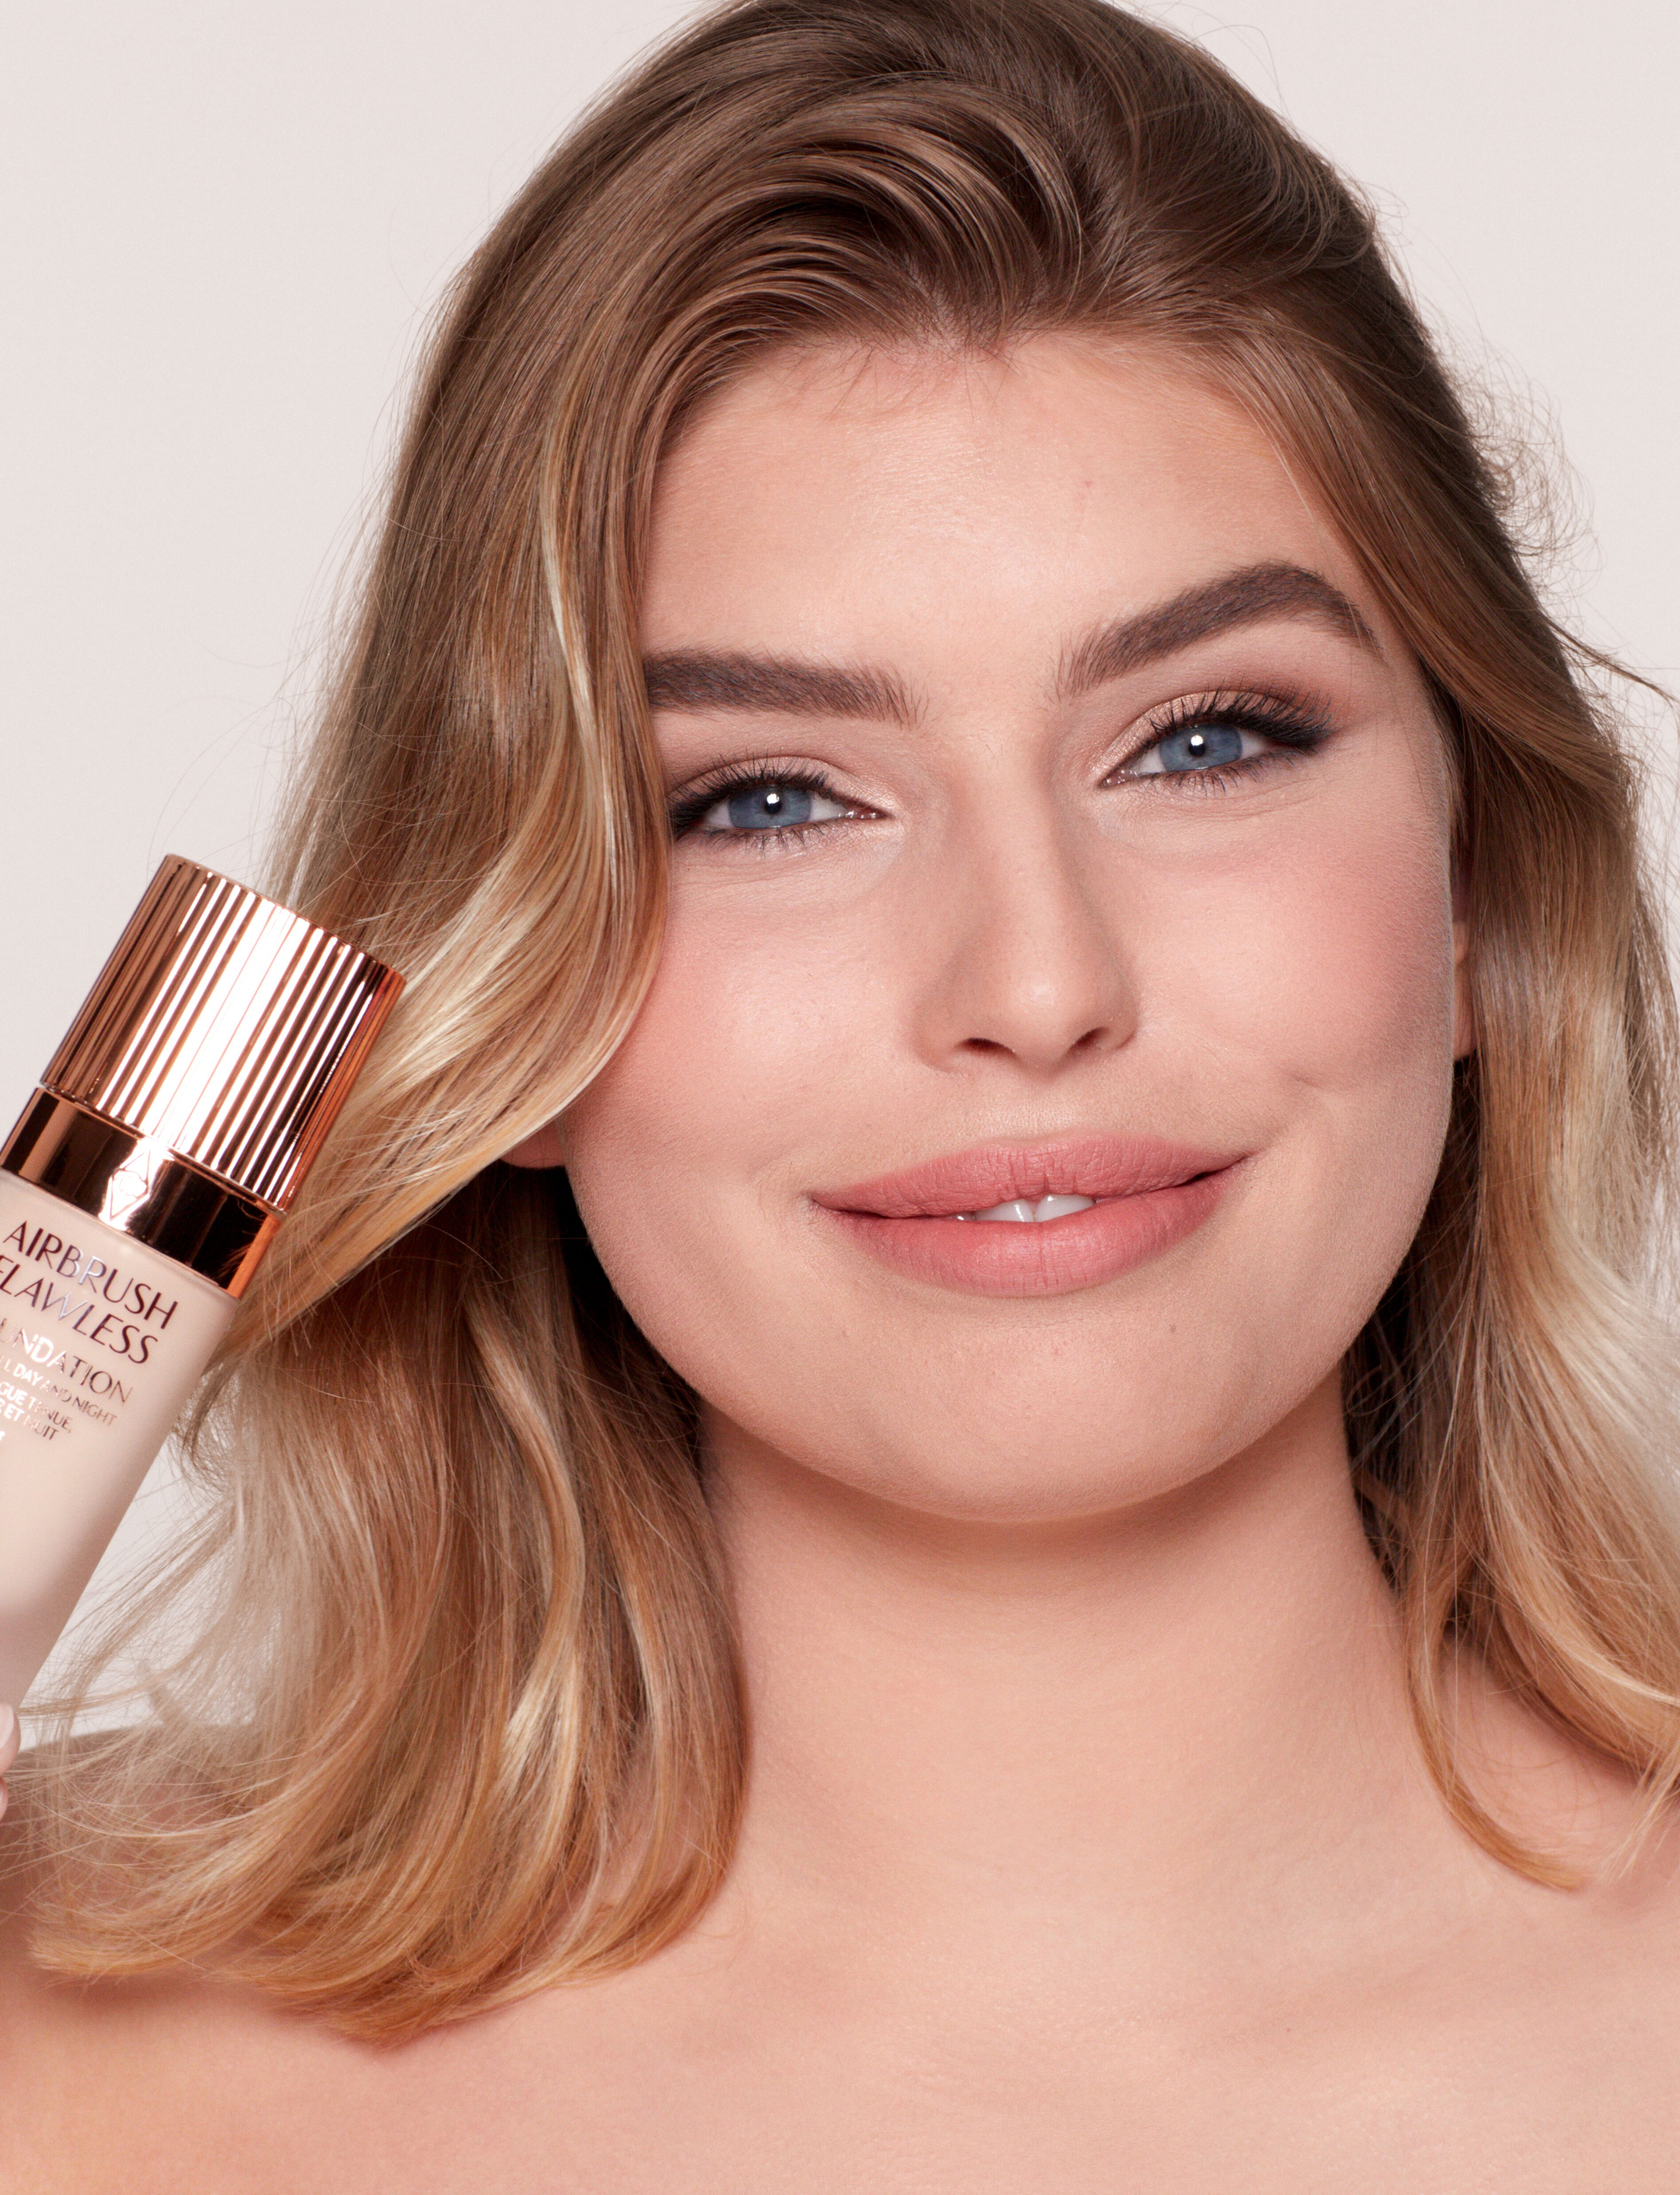 charlotte tilbury airbrush flawless foundation stores